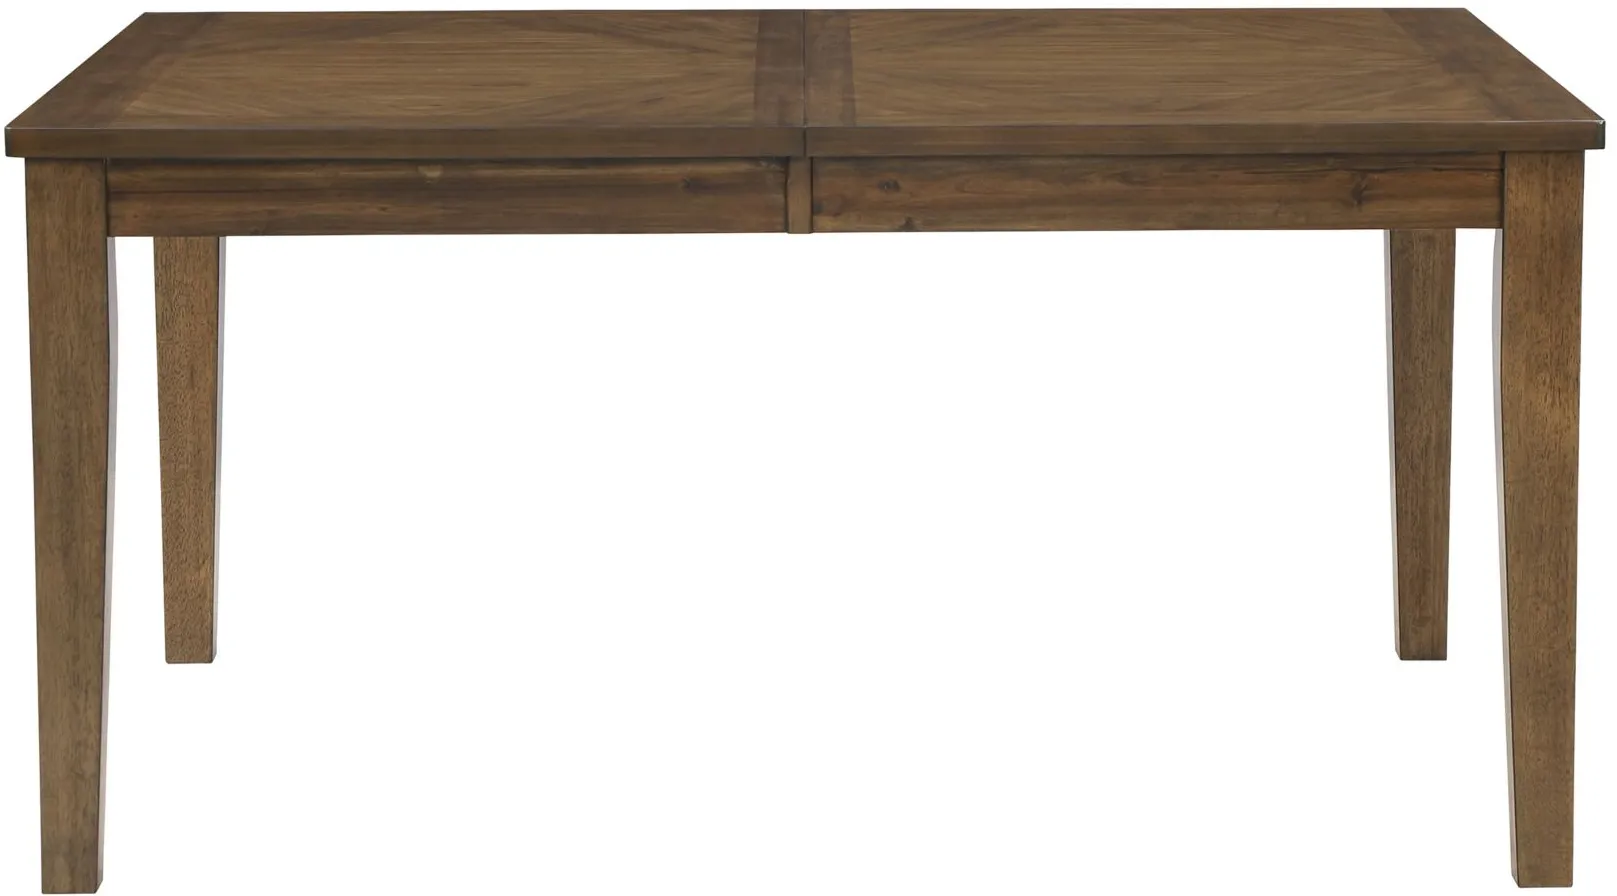 Benton Dining Room Table in Cherry by Homelegance